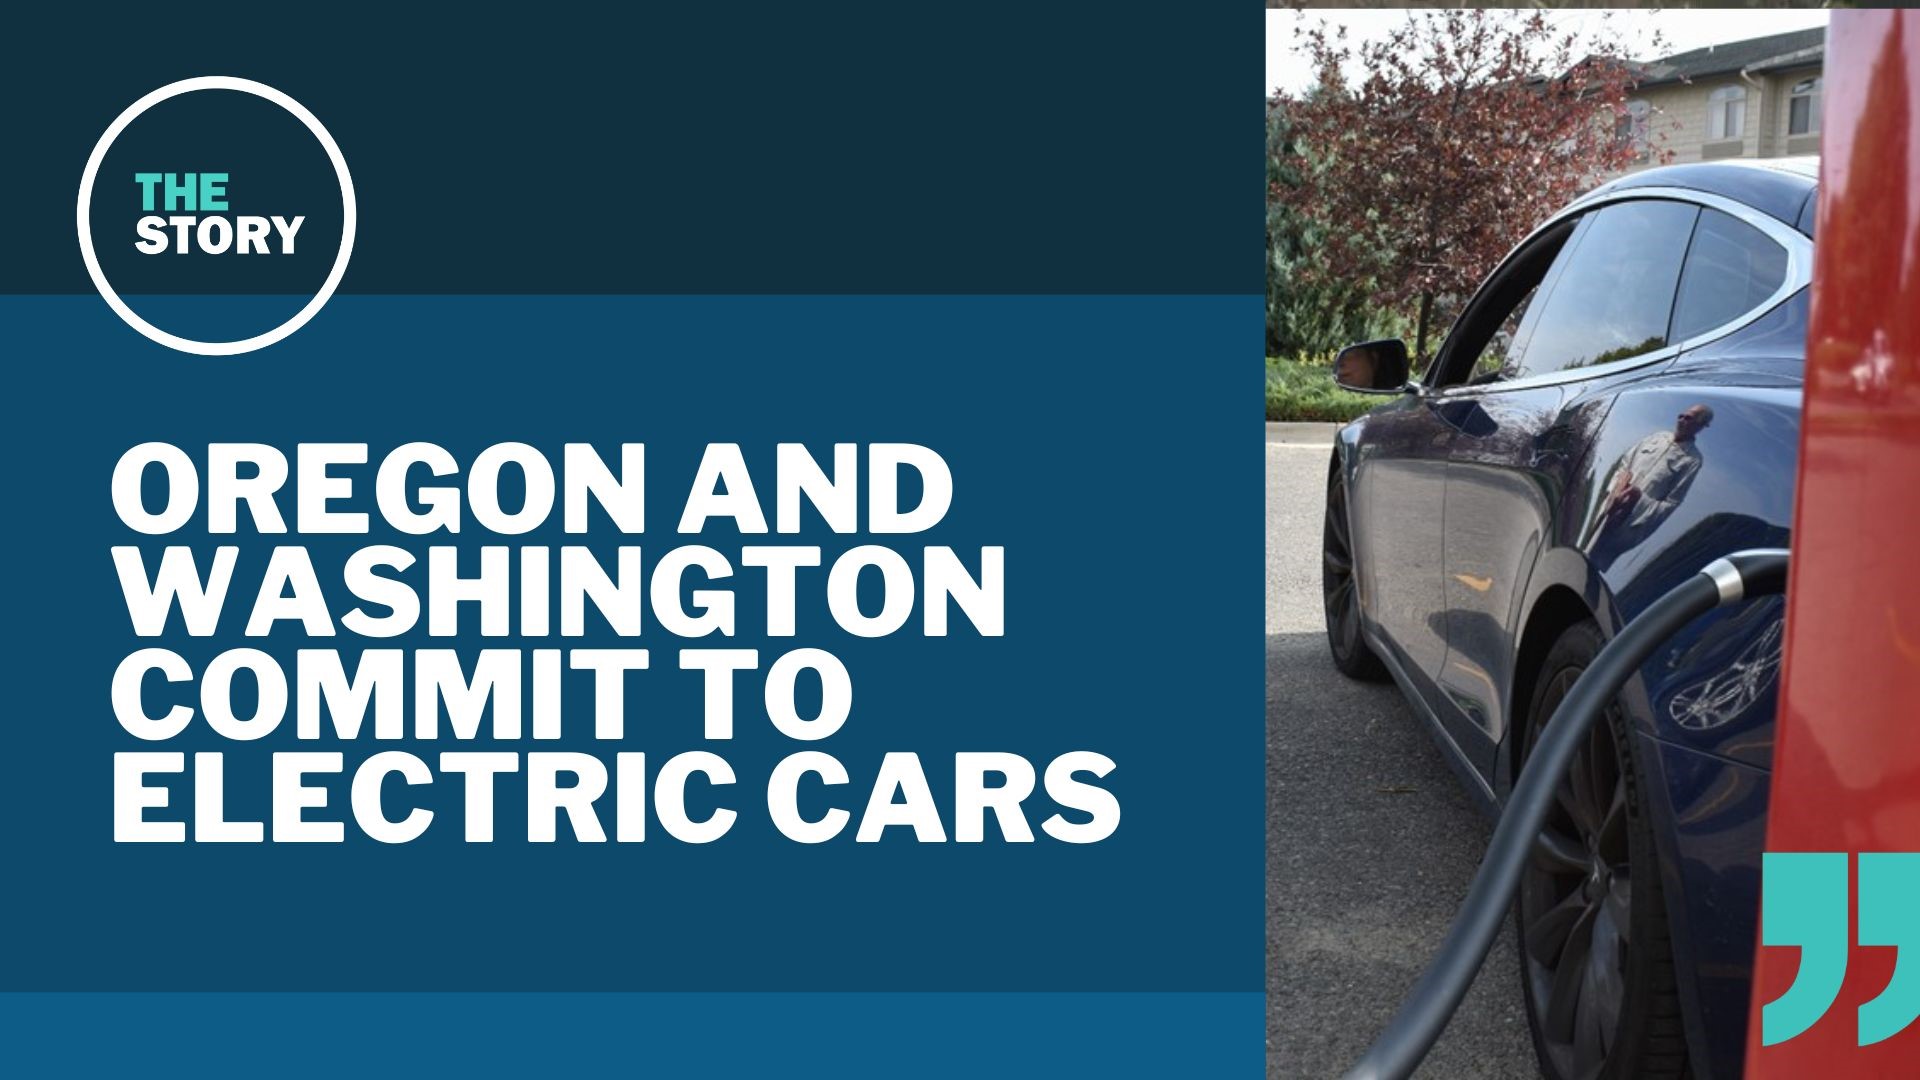 In just over a decade, all new cars sold in Oregon and Washington will be EVs — that's the plan at least.